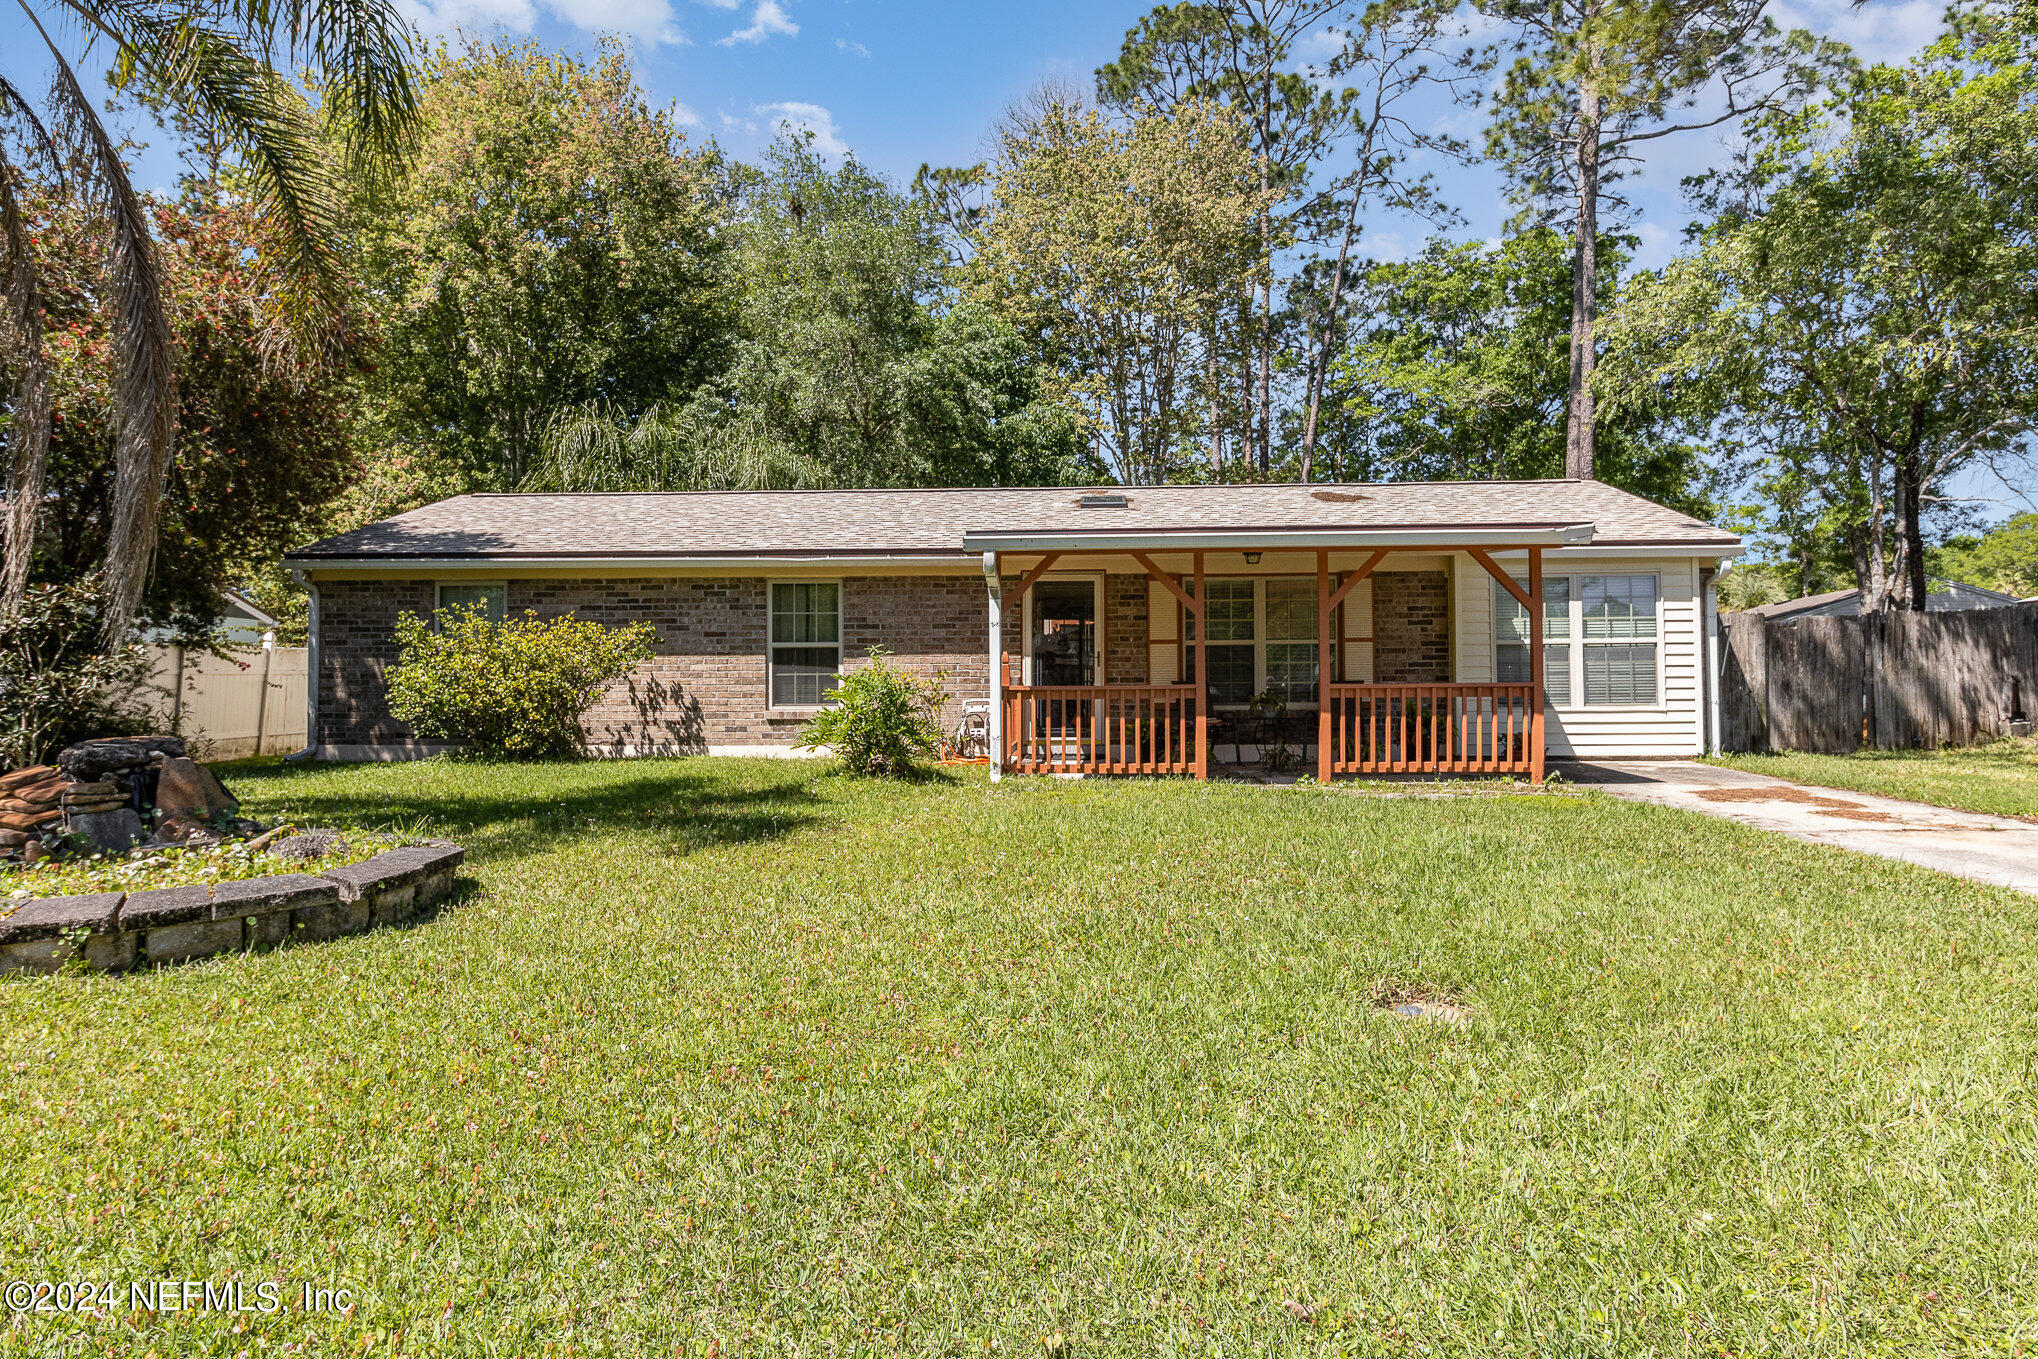 Middleburg, FL home for sale located at 1680 Susan Drive, Middleburg, FL 32068